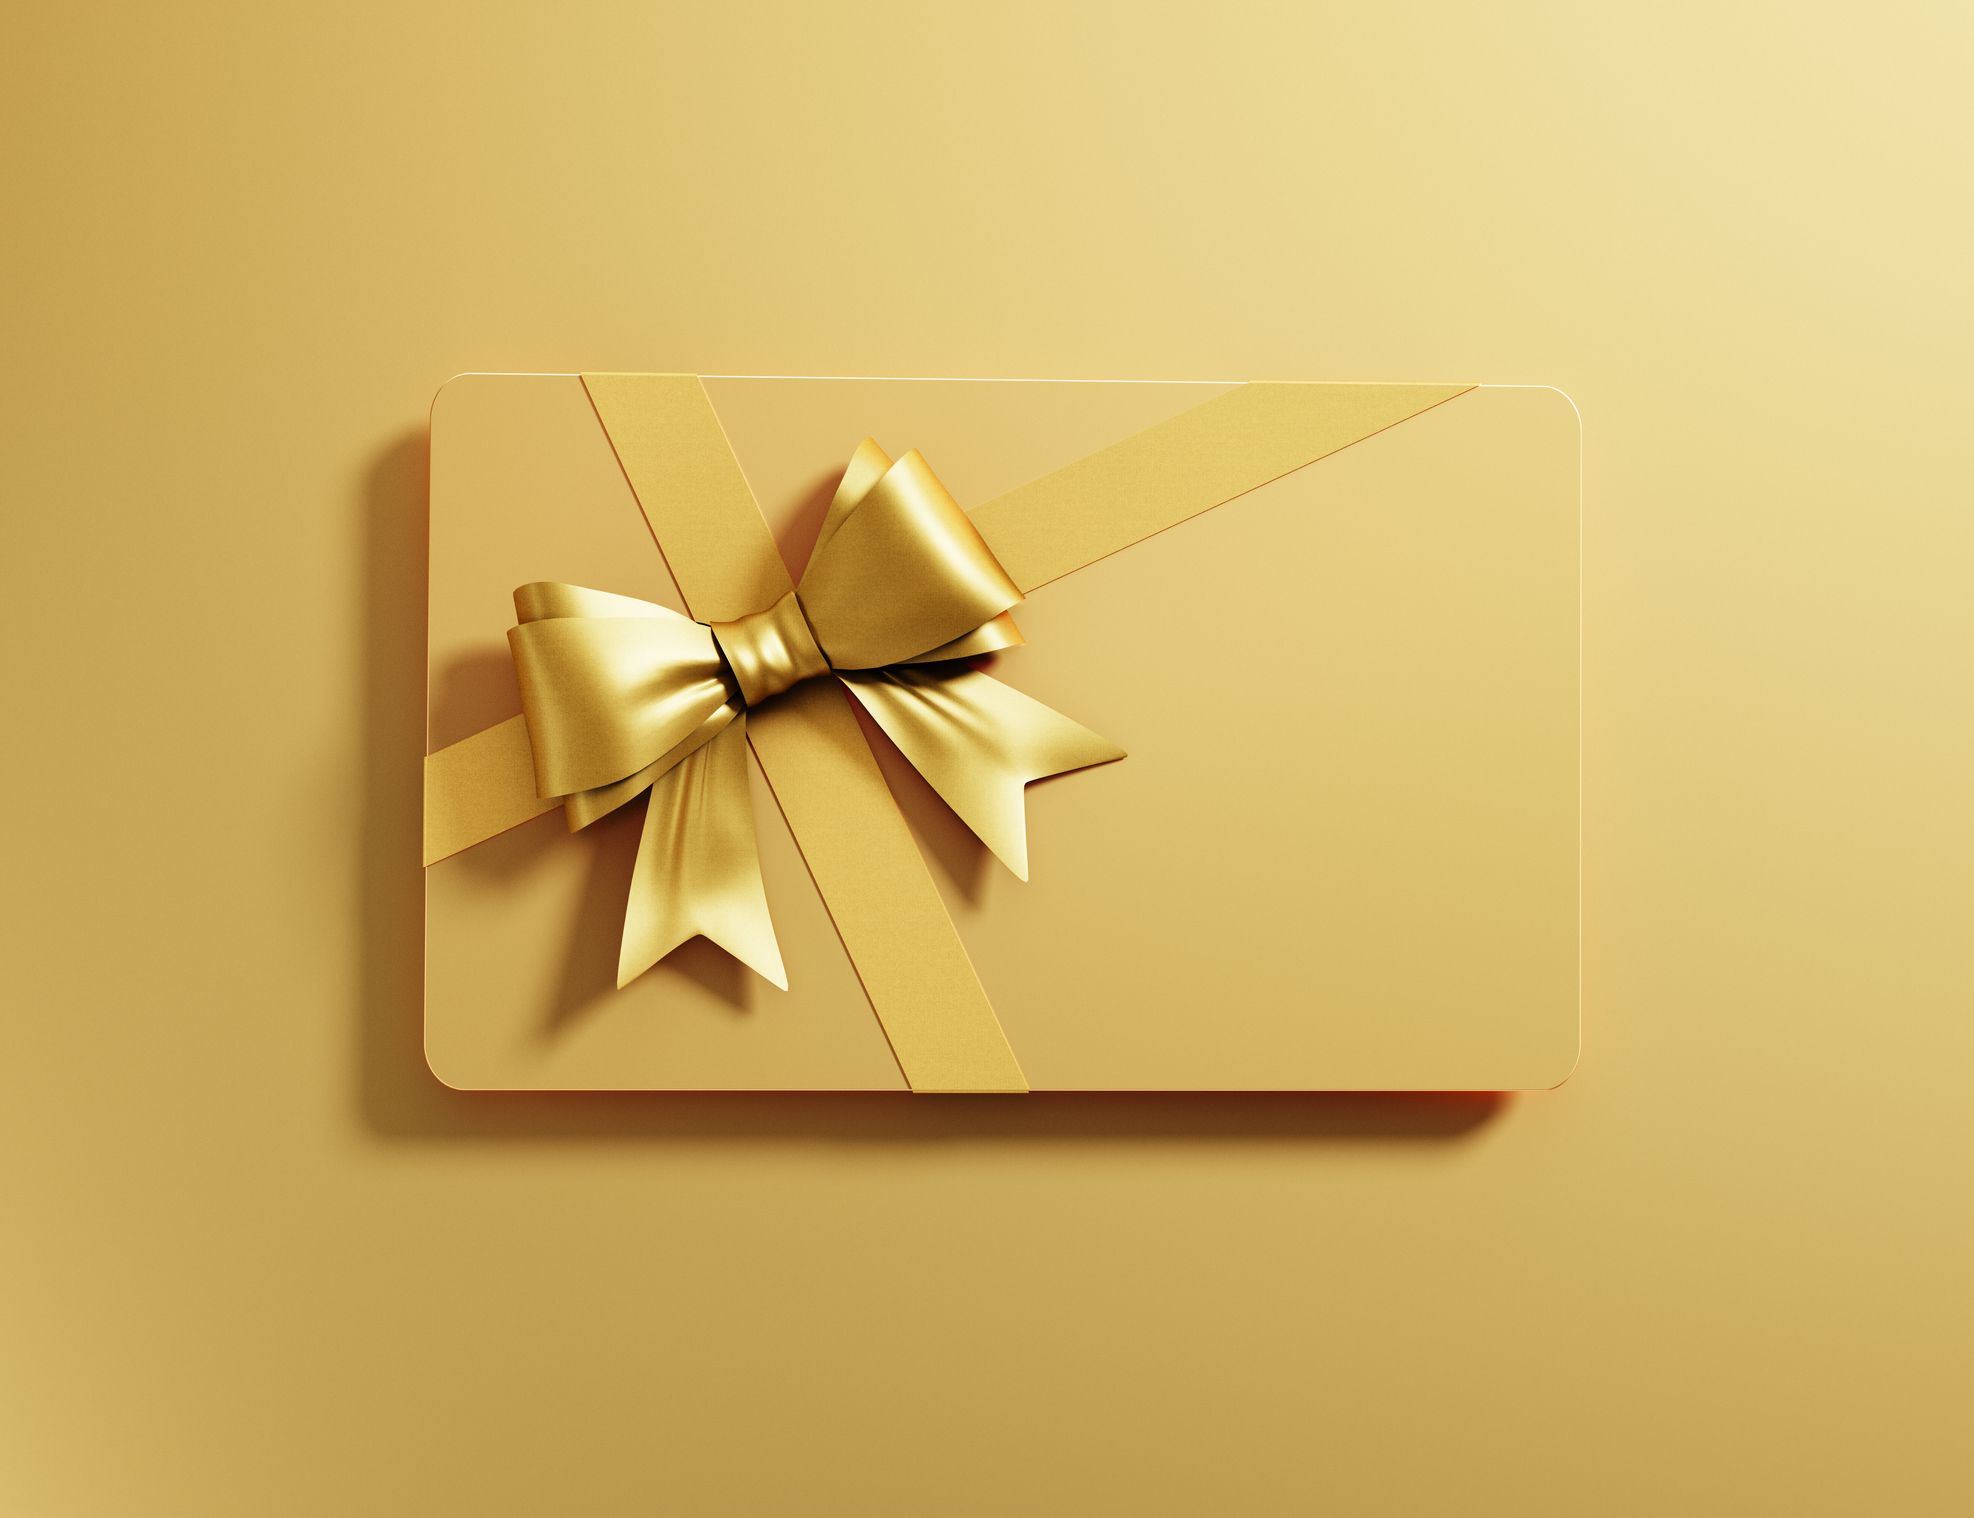 Gift Cards  Vouchers Online  Buy Gift Vouchers  E Gift Cards Online in  India  Amazonin